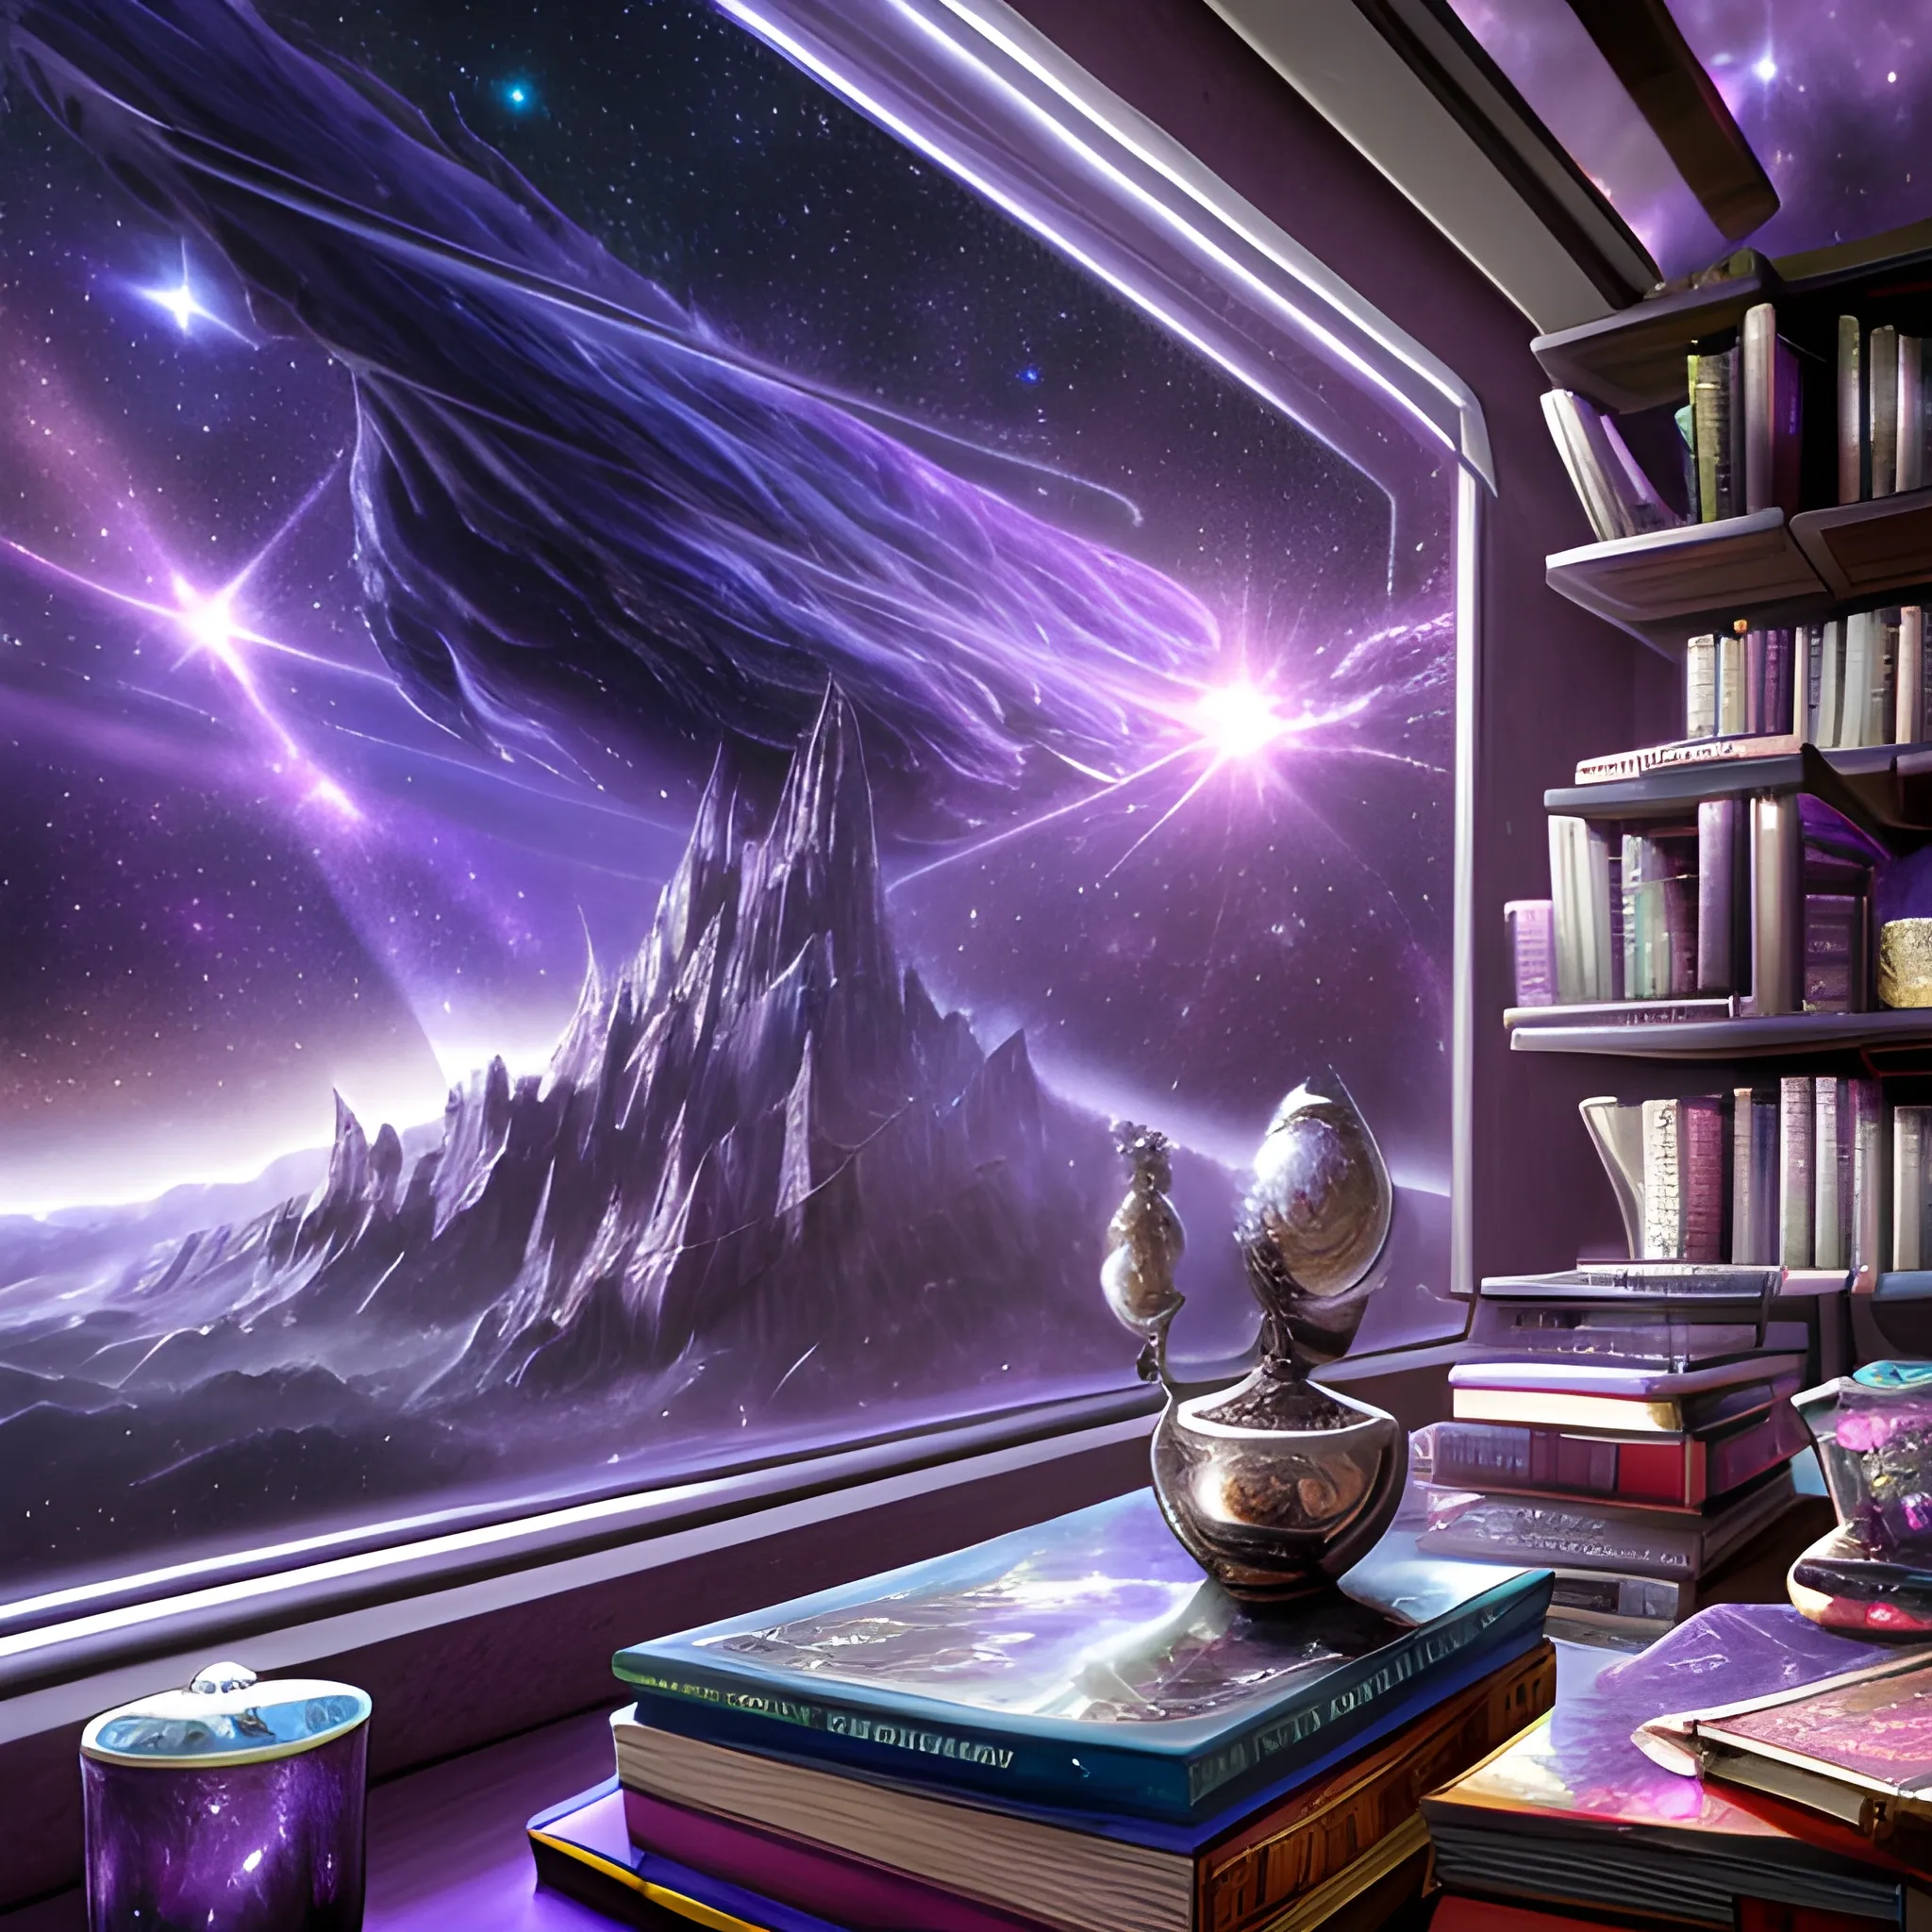 (((high detail))), best quality, (detailed), (high resolution) purple, silver universe, books, books on a table, shelf with some books, studio ghiblin, anime, galaxy in the sky,
, Trippy, backround
